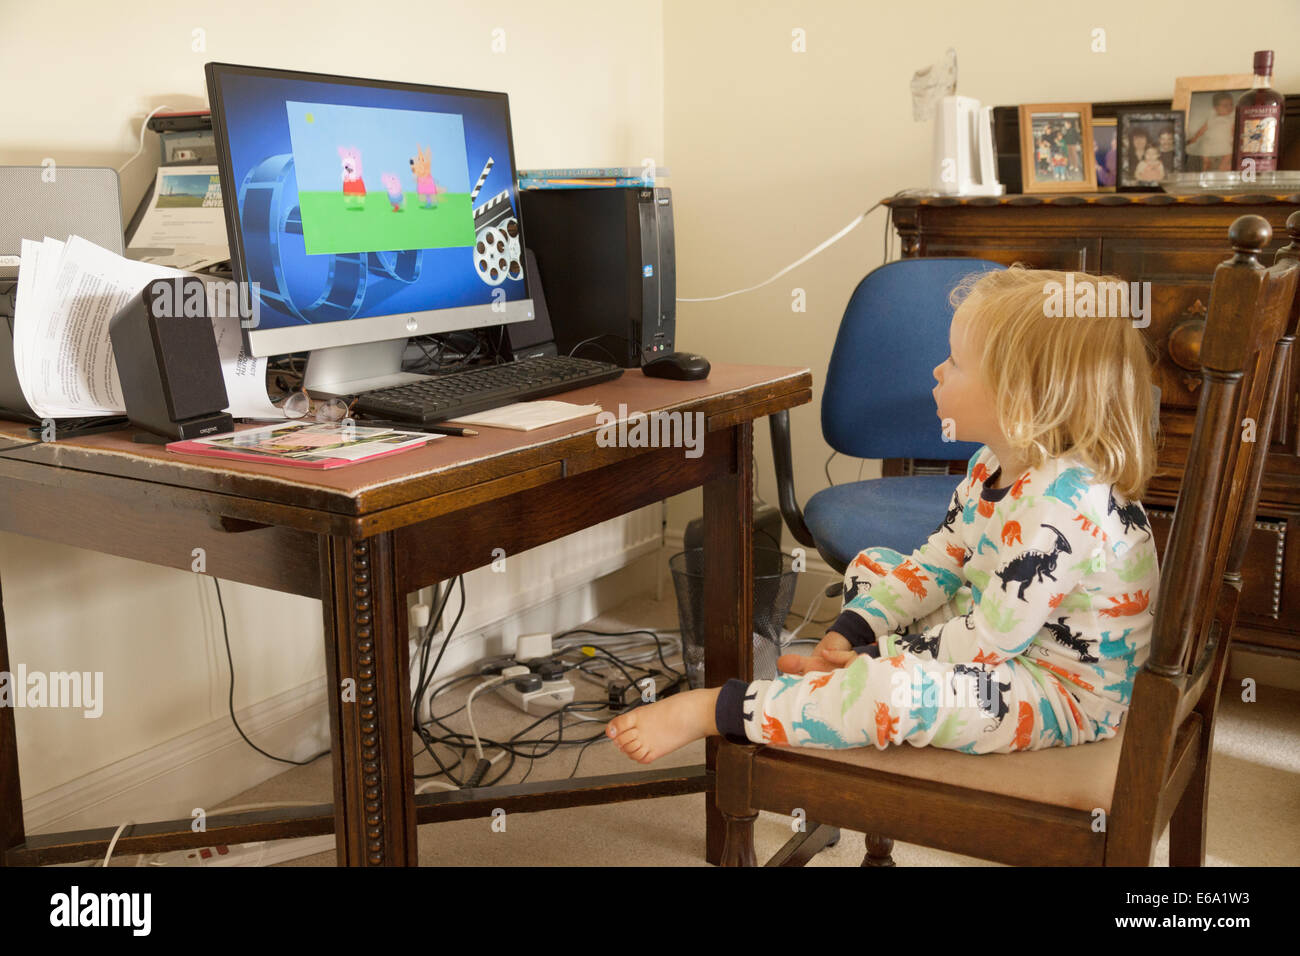 A young child watching a Peppa Pig cartoon on a computer at home, Essex UK Stock Photo